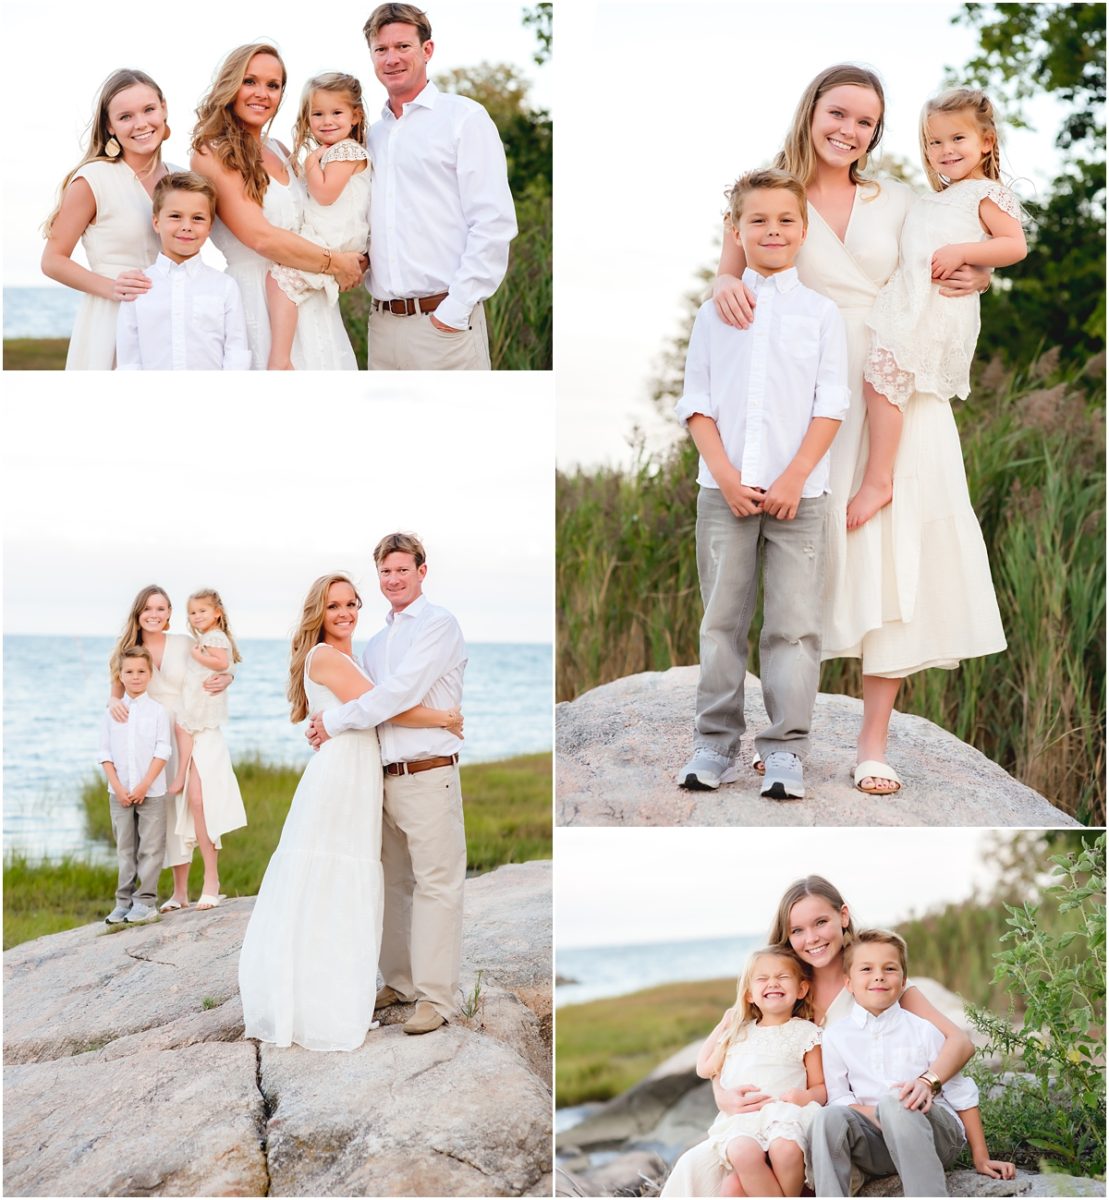 Best Family Photographers in CT | Natural CT Family Photography | CT Family Photographer | Candid Family Photography | CT Photography | www.kellidease.com